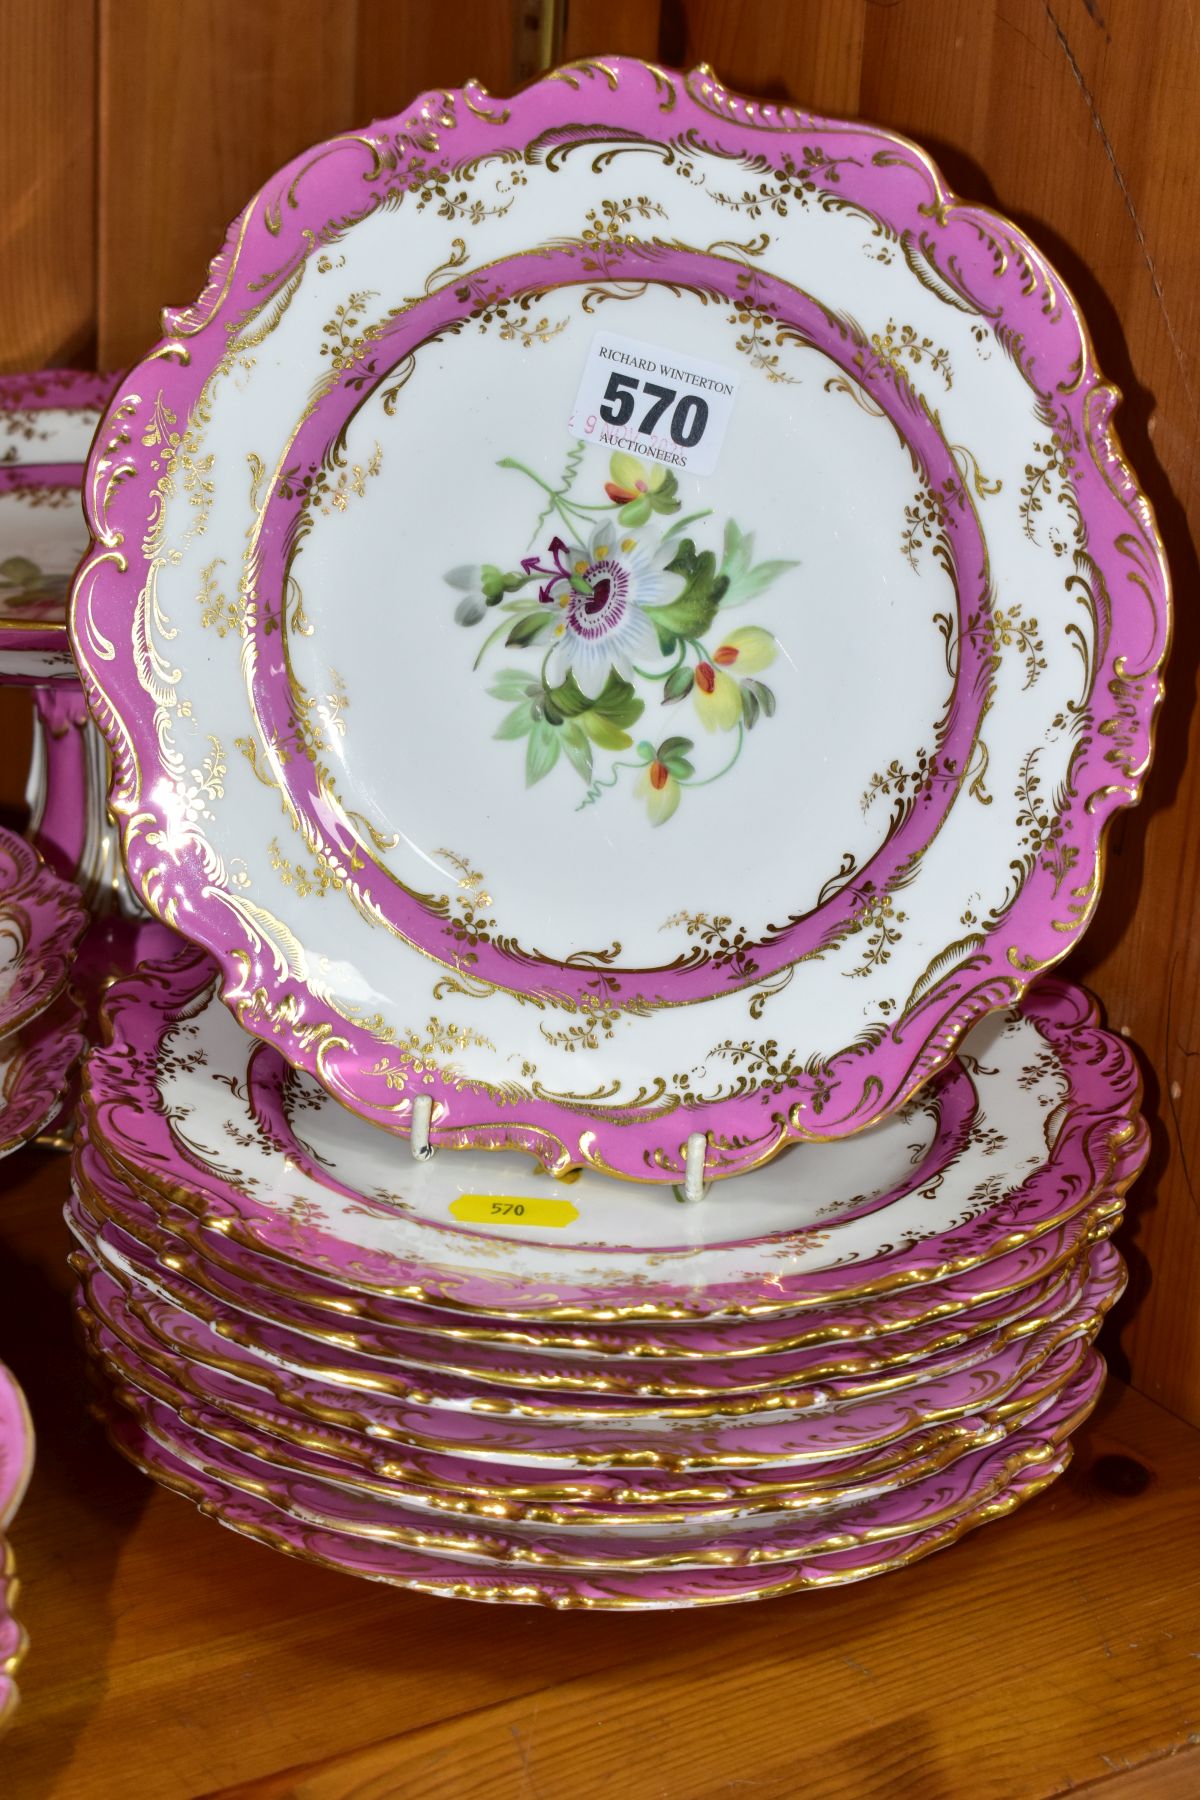 A SIXTEEN PIECE LATE VICTORIAN/EDWARDIAN DESSERT SET, POSSIBLY COALPORT, with gilt and modelled - Image 2 of 10